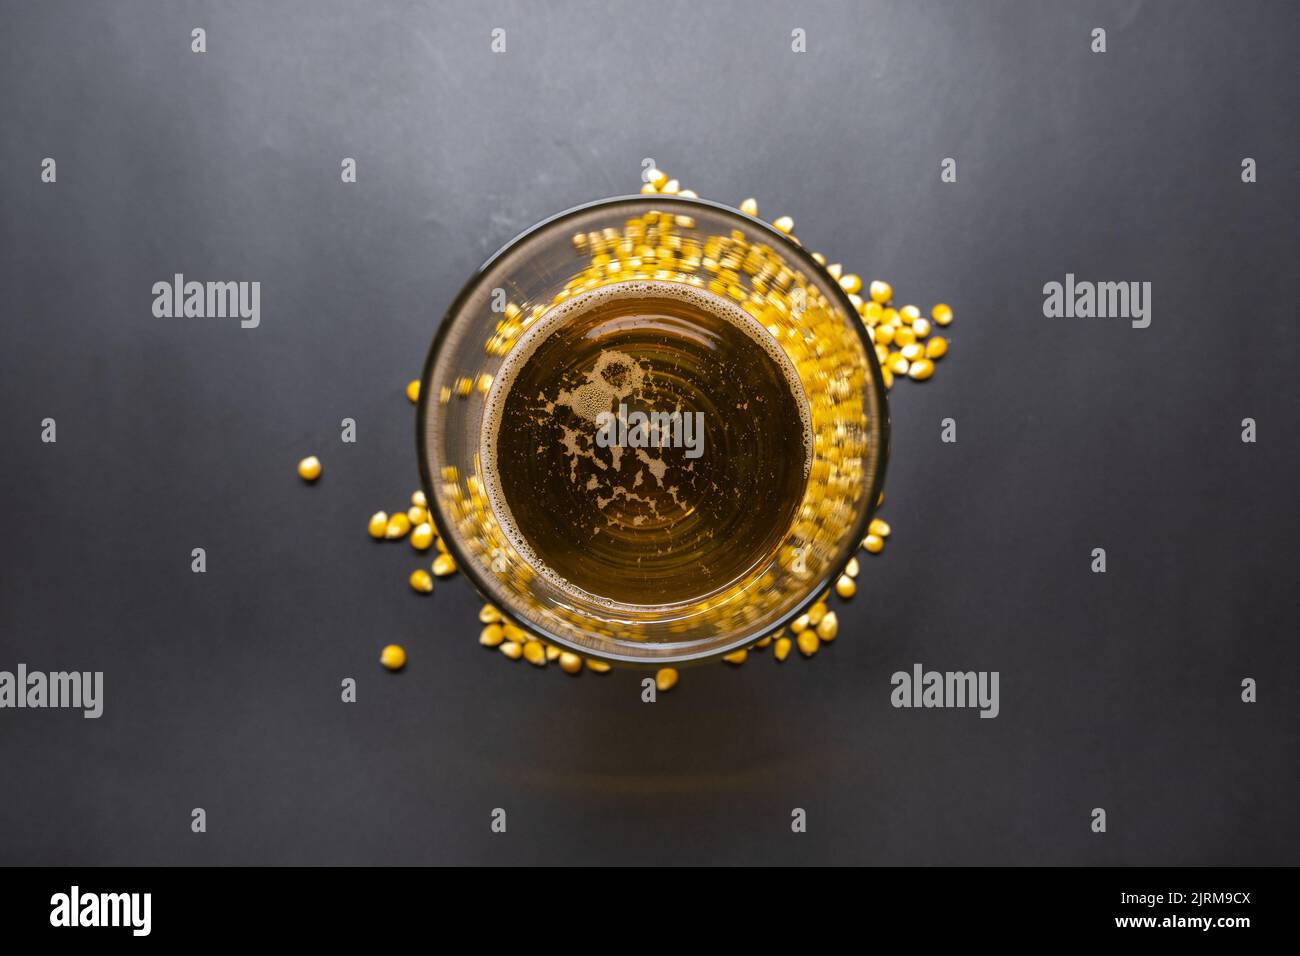 Beer glass on  raw corn, beer glass of corn on black background, beer concept idea photo, isolated photo, top view photo. Stock Photo